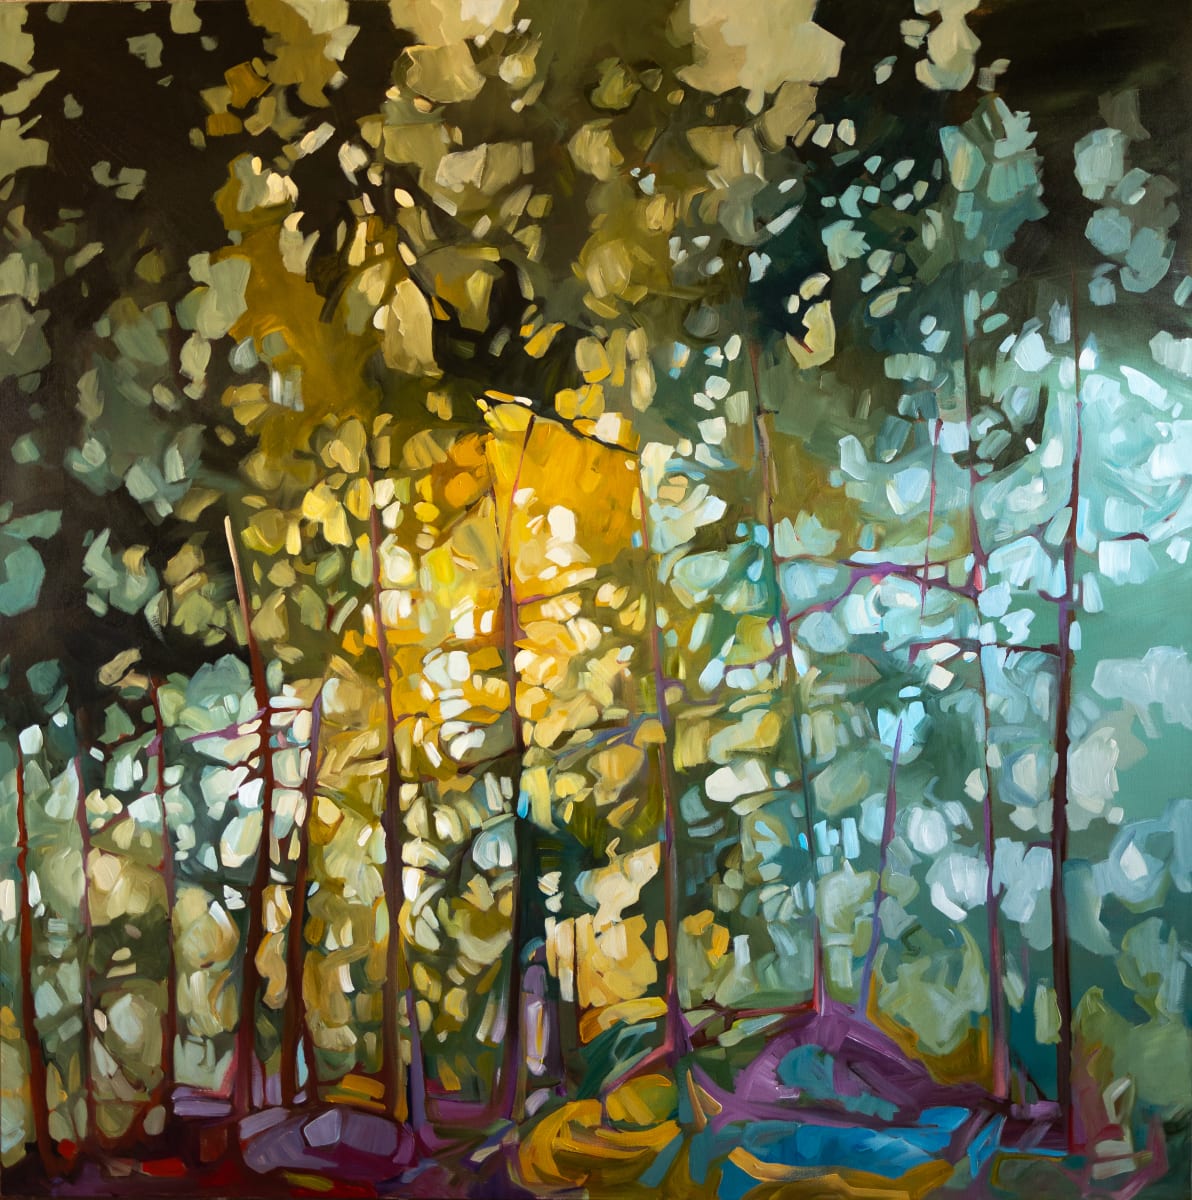 Getting Lost 2 by Holly Ann Friesen  Image: I choose to use form in abstraction to maintain the connection to place,
while allowing space for the viewer to lose themselves in the landscape, and
their memories and experiences. Form and value or light is my connection to
nature.